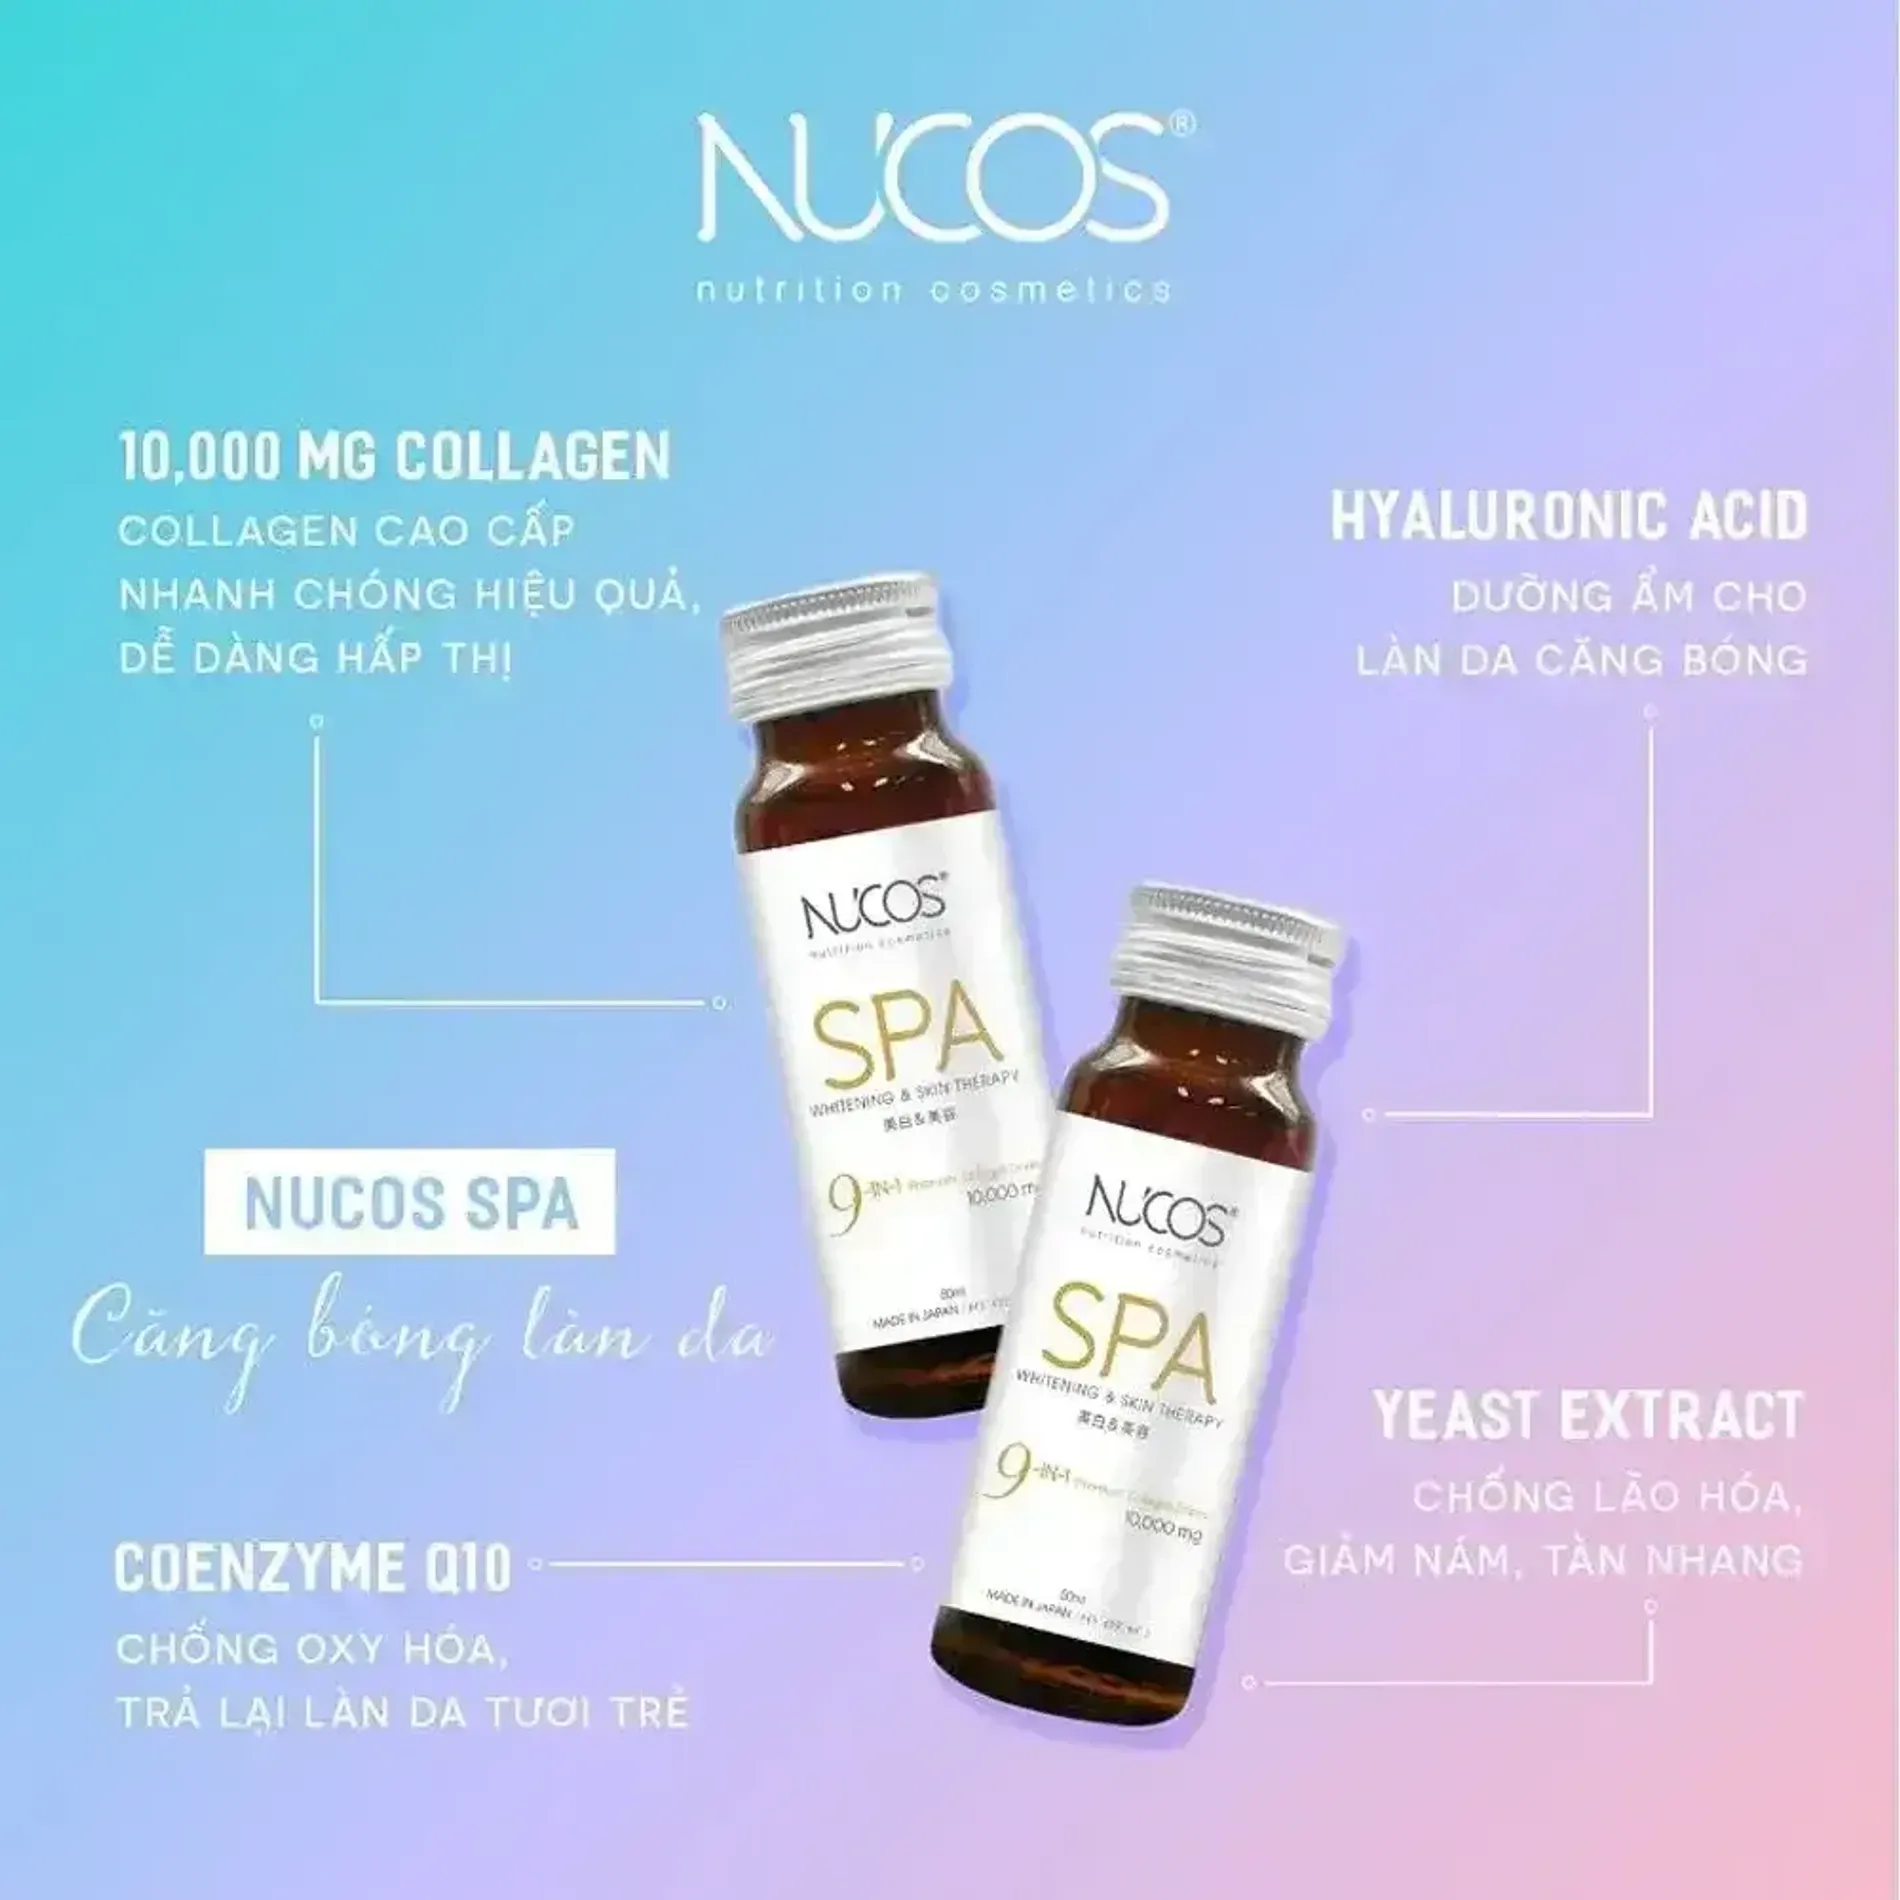 nuoc-uong-bo-sung-collagen-nucos-spa-13500-skintherapy-collagen-drink-hop-10-chai-x-50ml-2